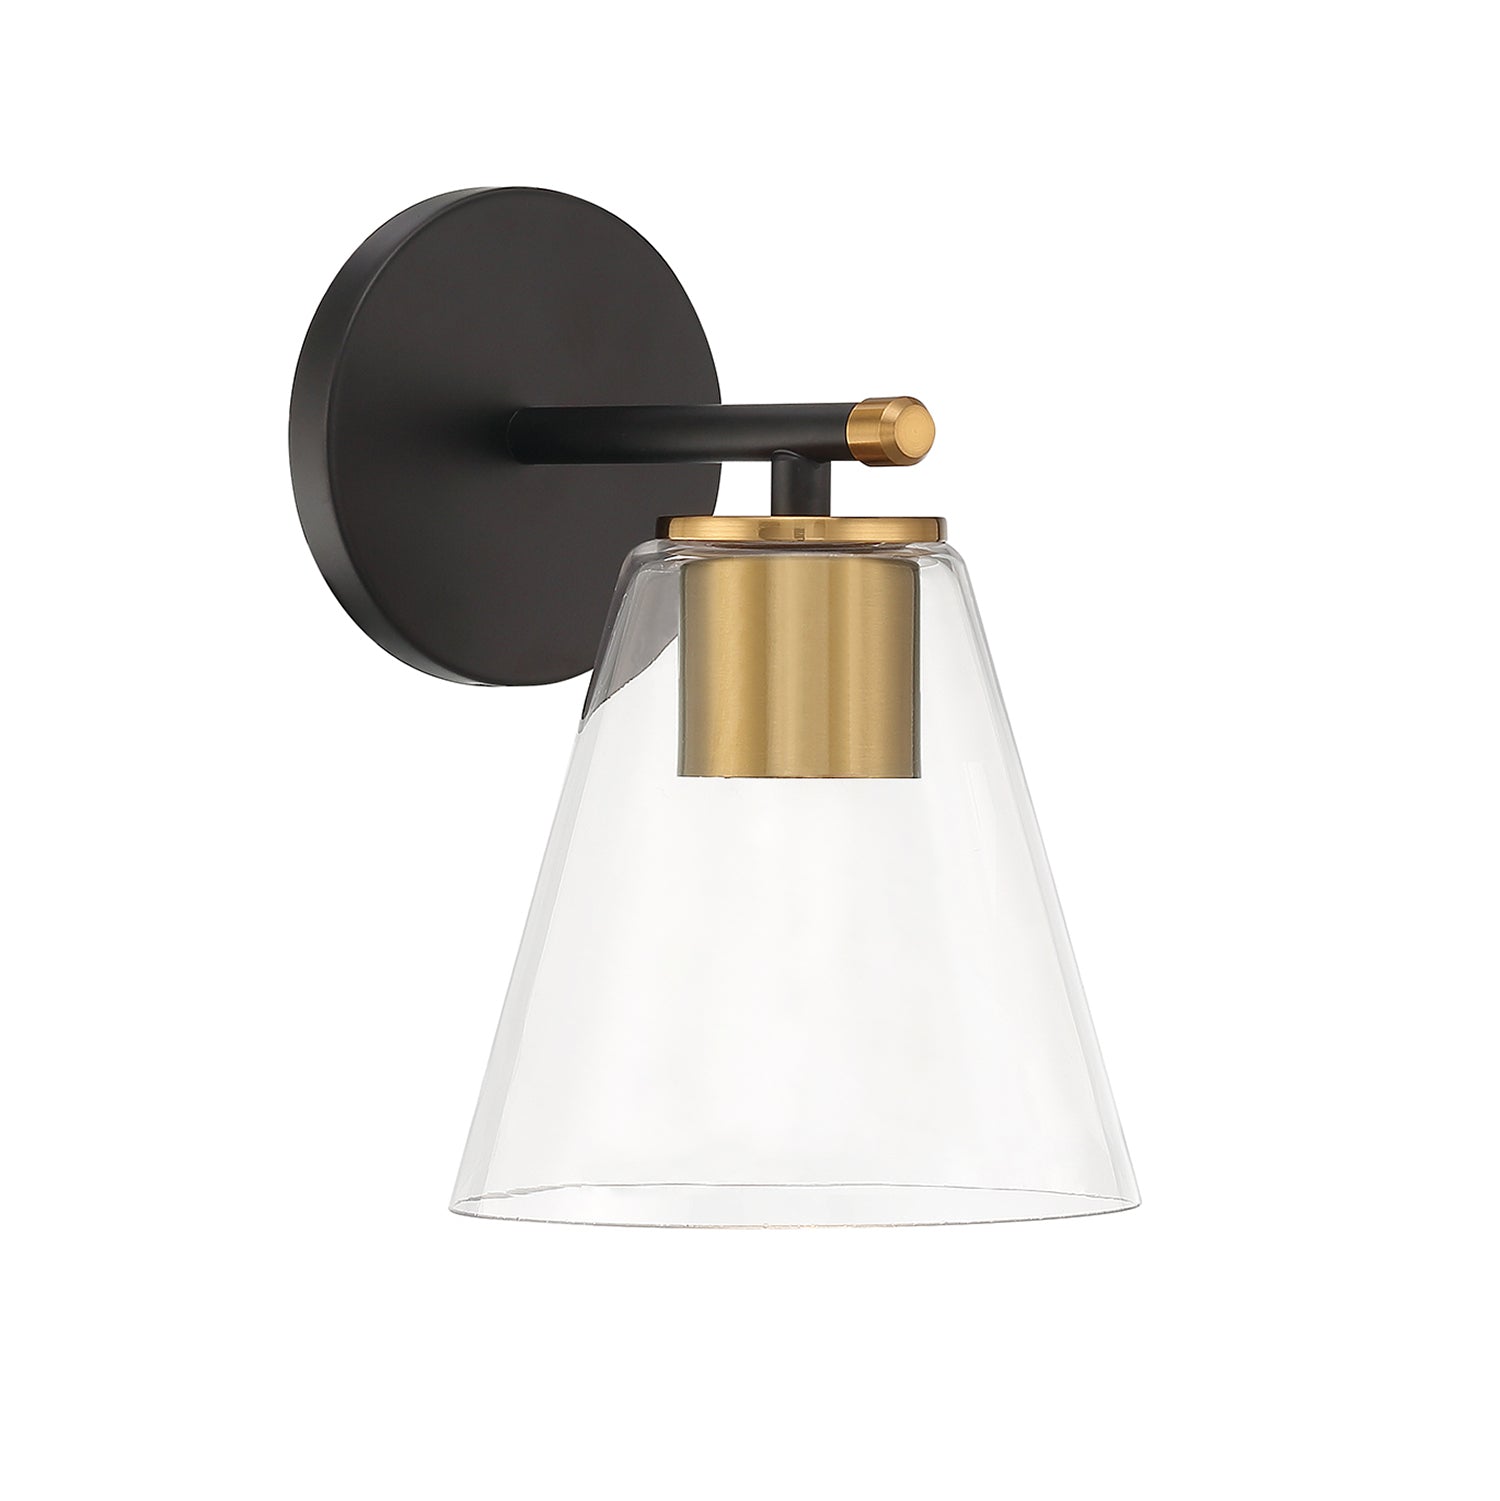 Carlisle Vanity Wall Sconce, Matte Black and Brushed Brass